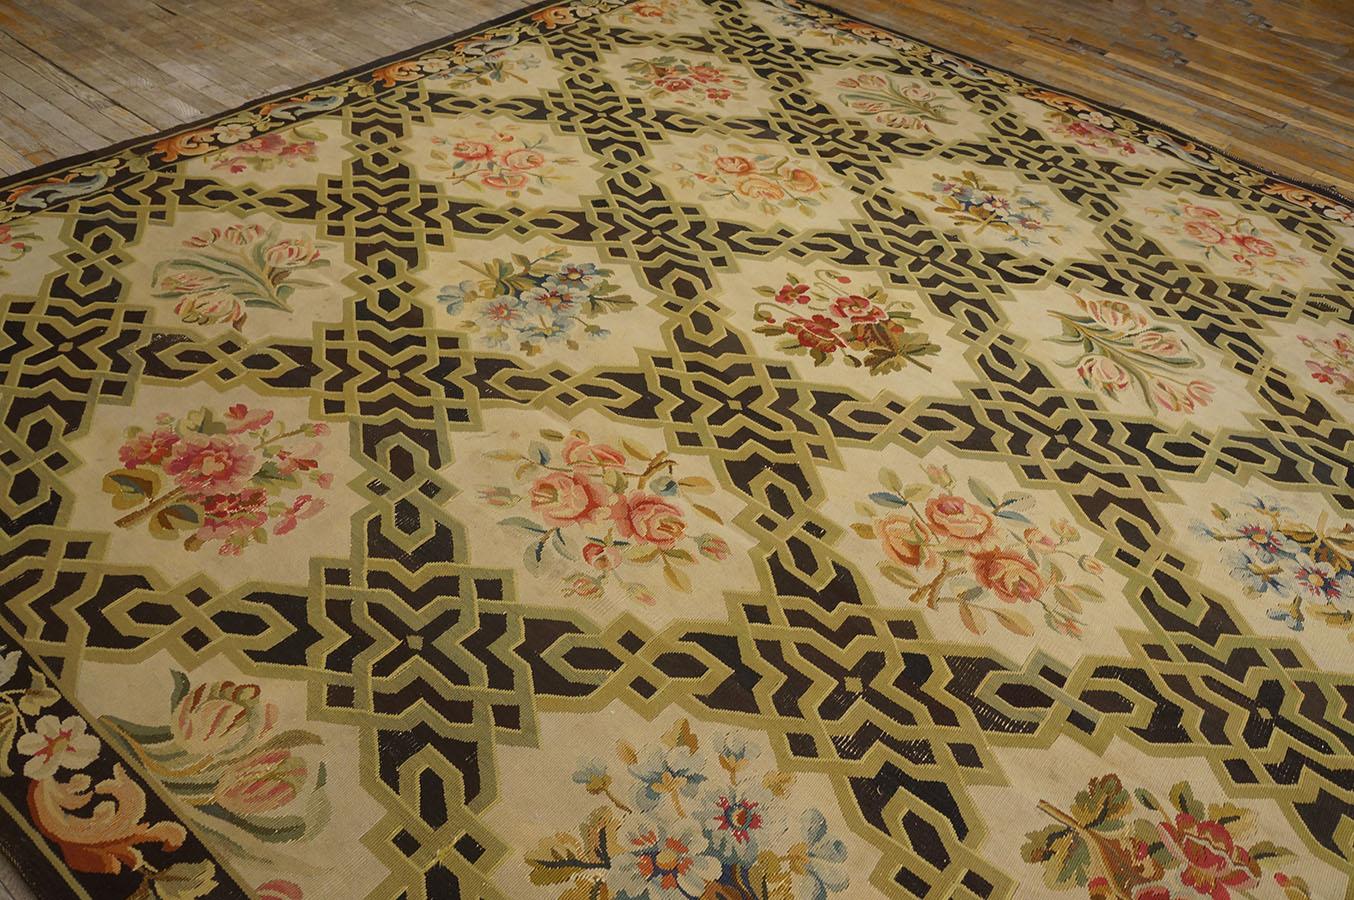 Early 20th Century French Aubusson Carpet ( 9' 8'' x 15' 3'' - 295 x 465 cm ) For Sale 3